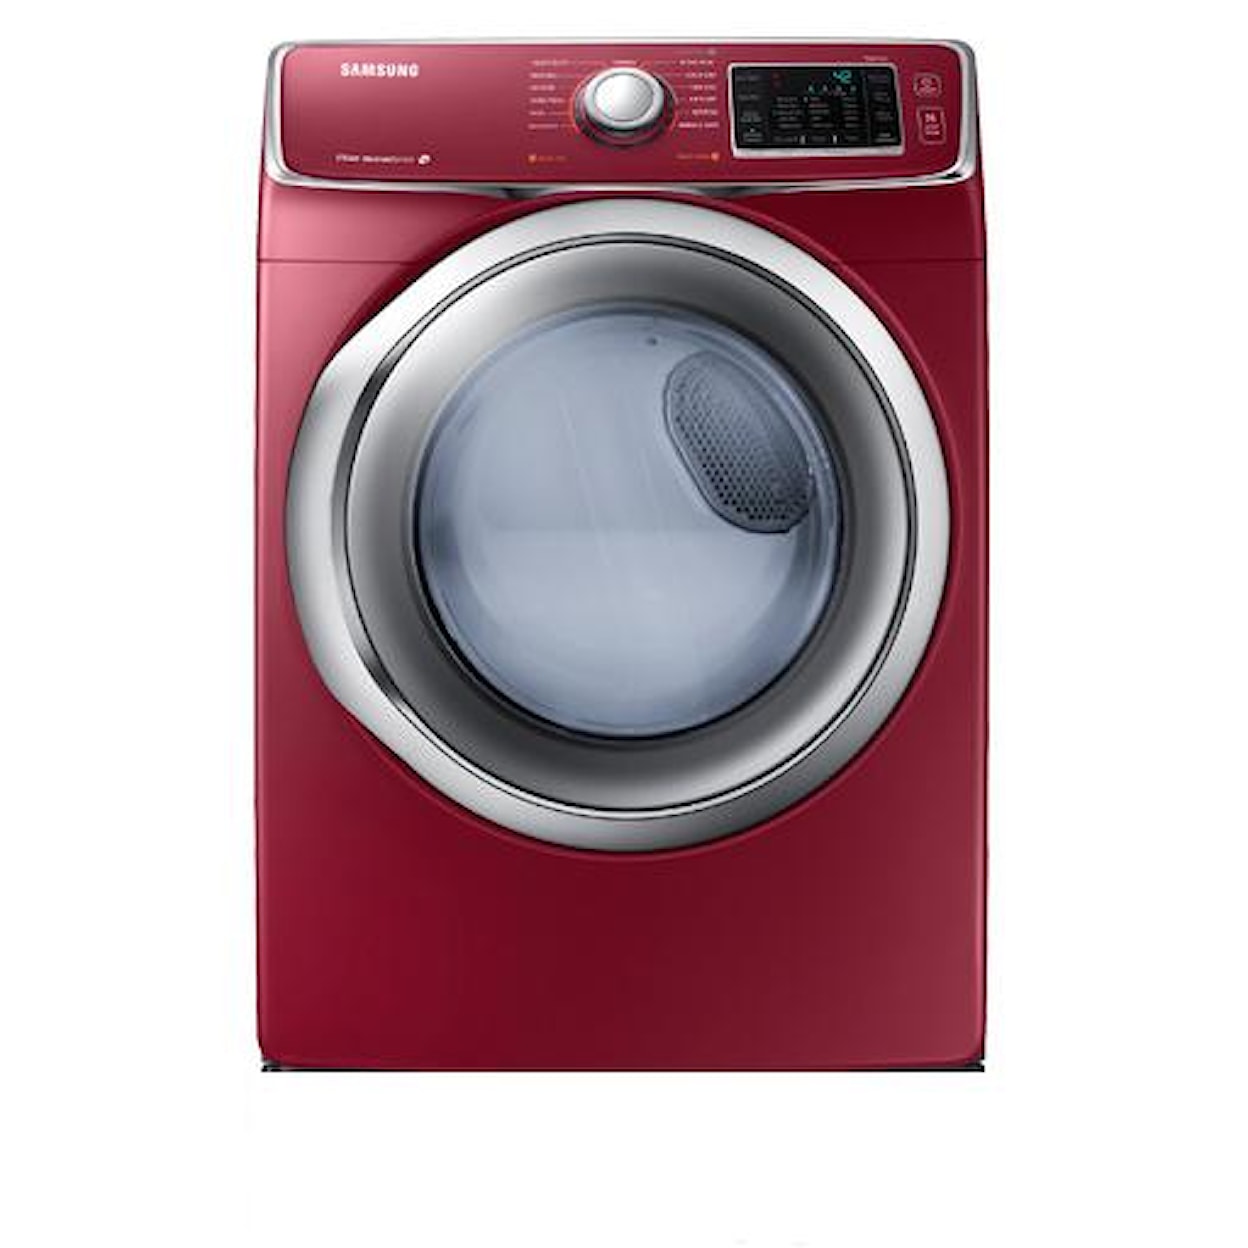 Samsung Appliances Electric Dryers 7.5 cu. ft. Electric Front Load Dryer